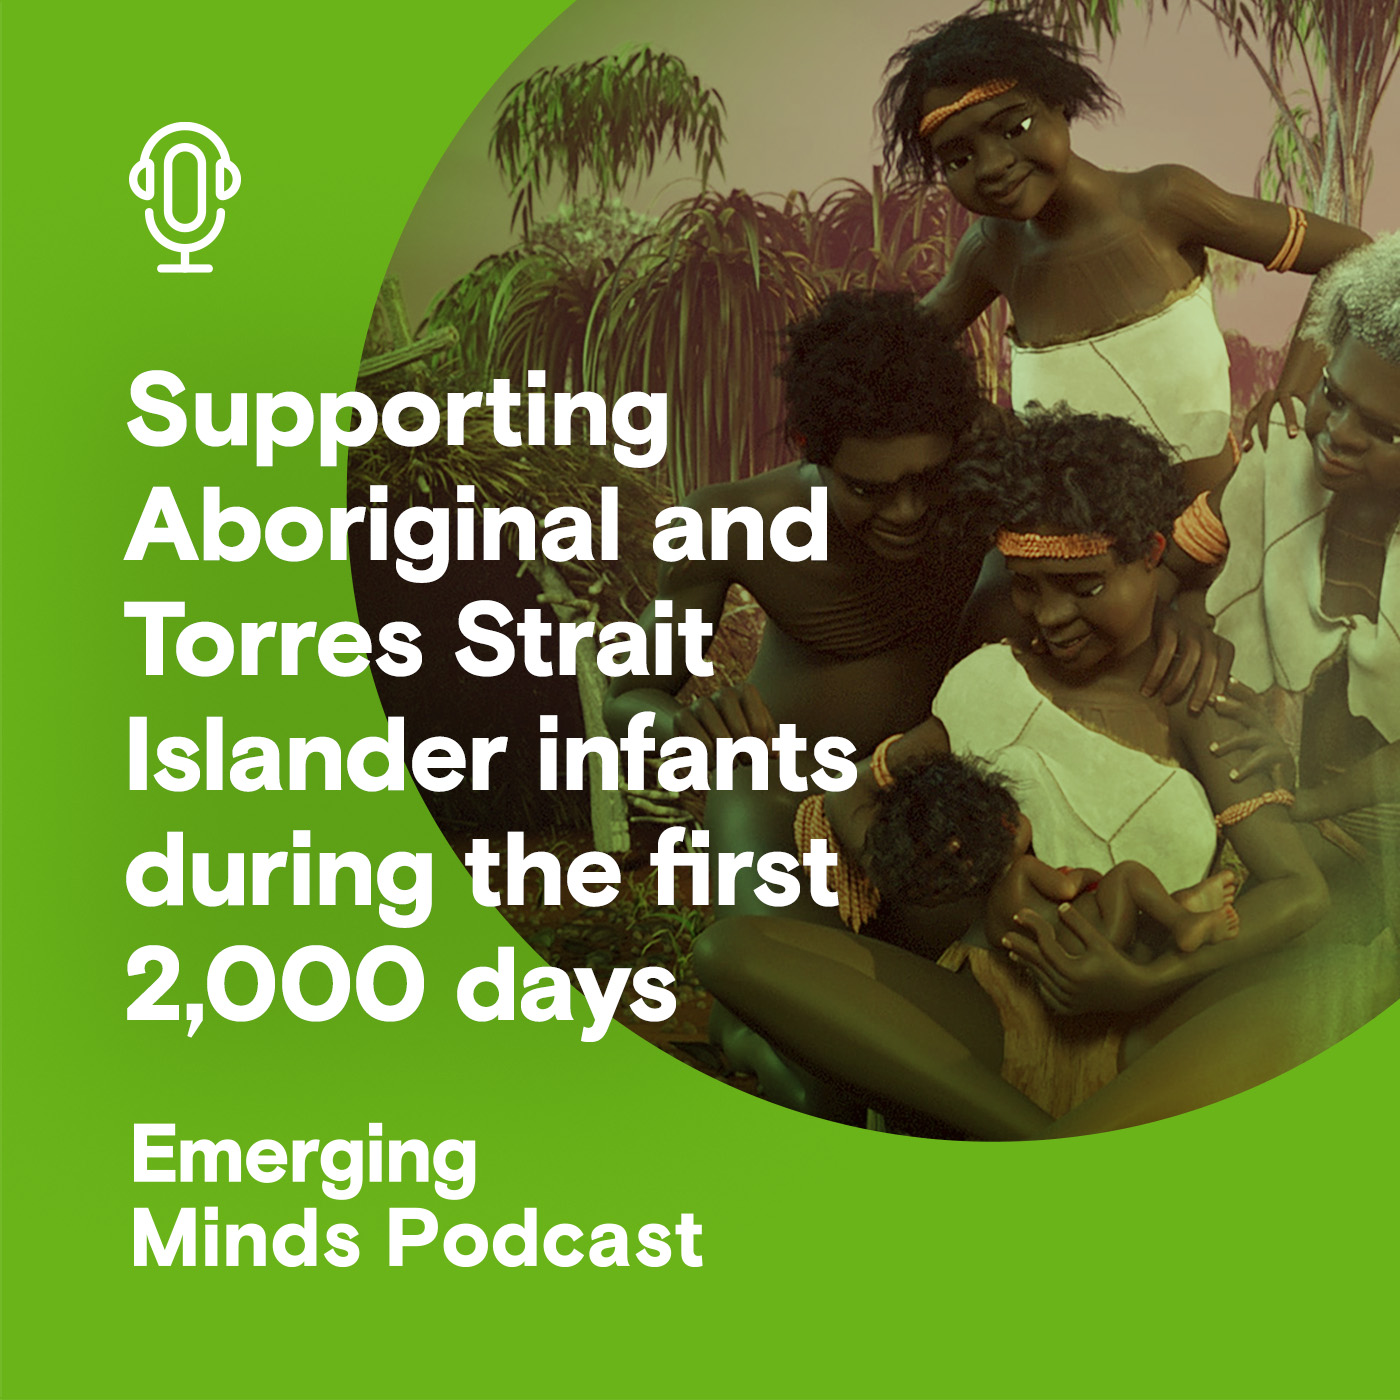 Supporting Aboriginal and Torres Strait Islander infants during the first 2,000 days